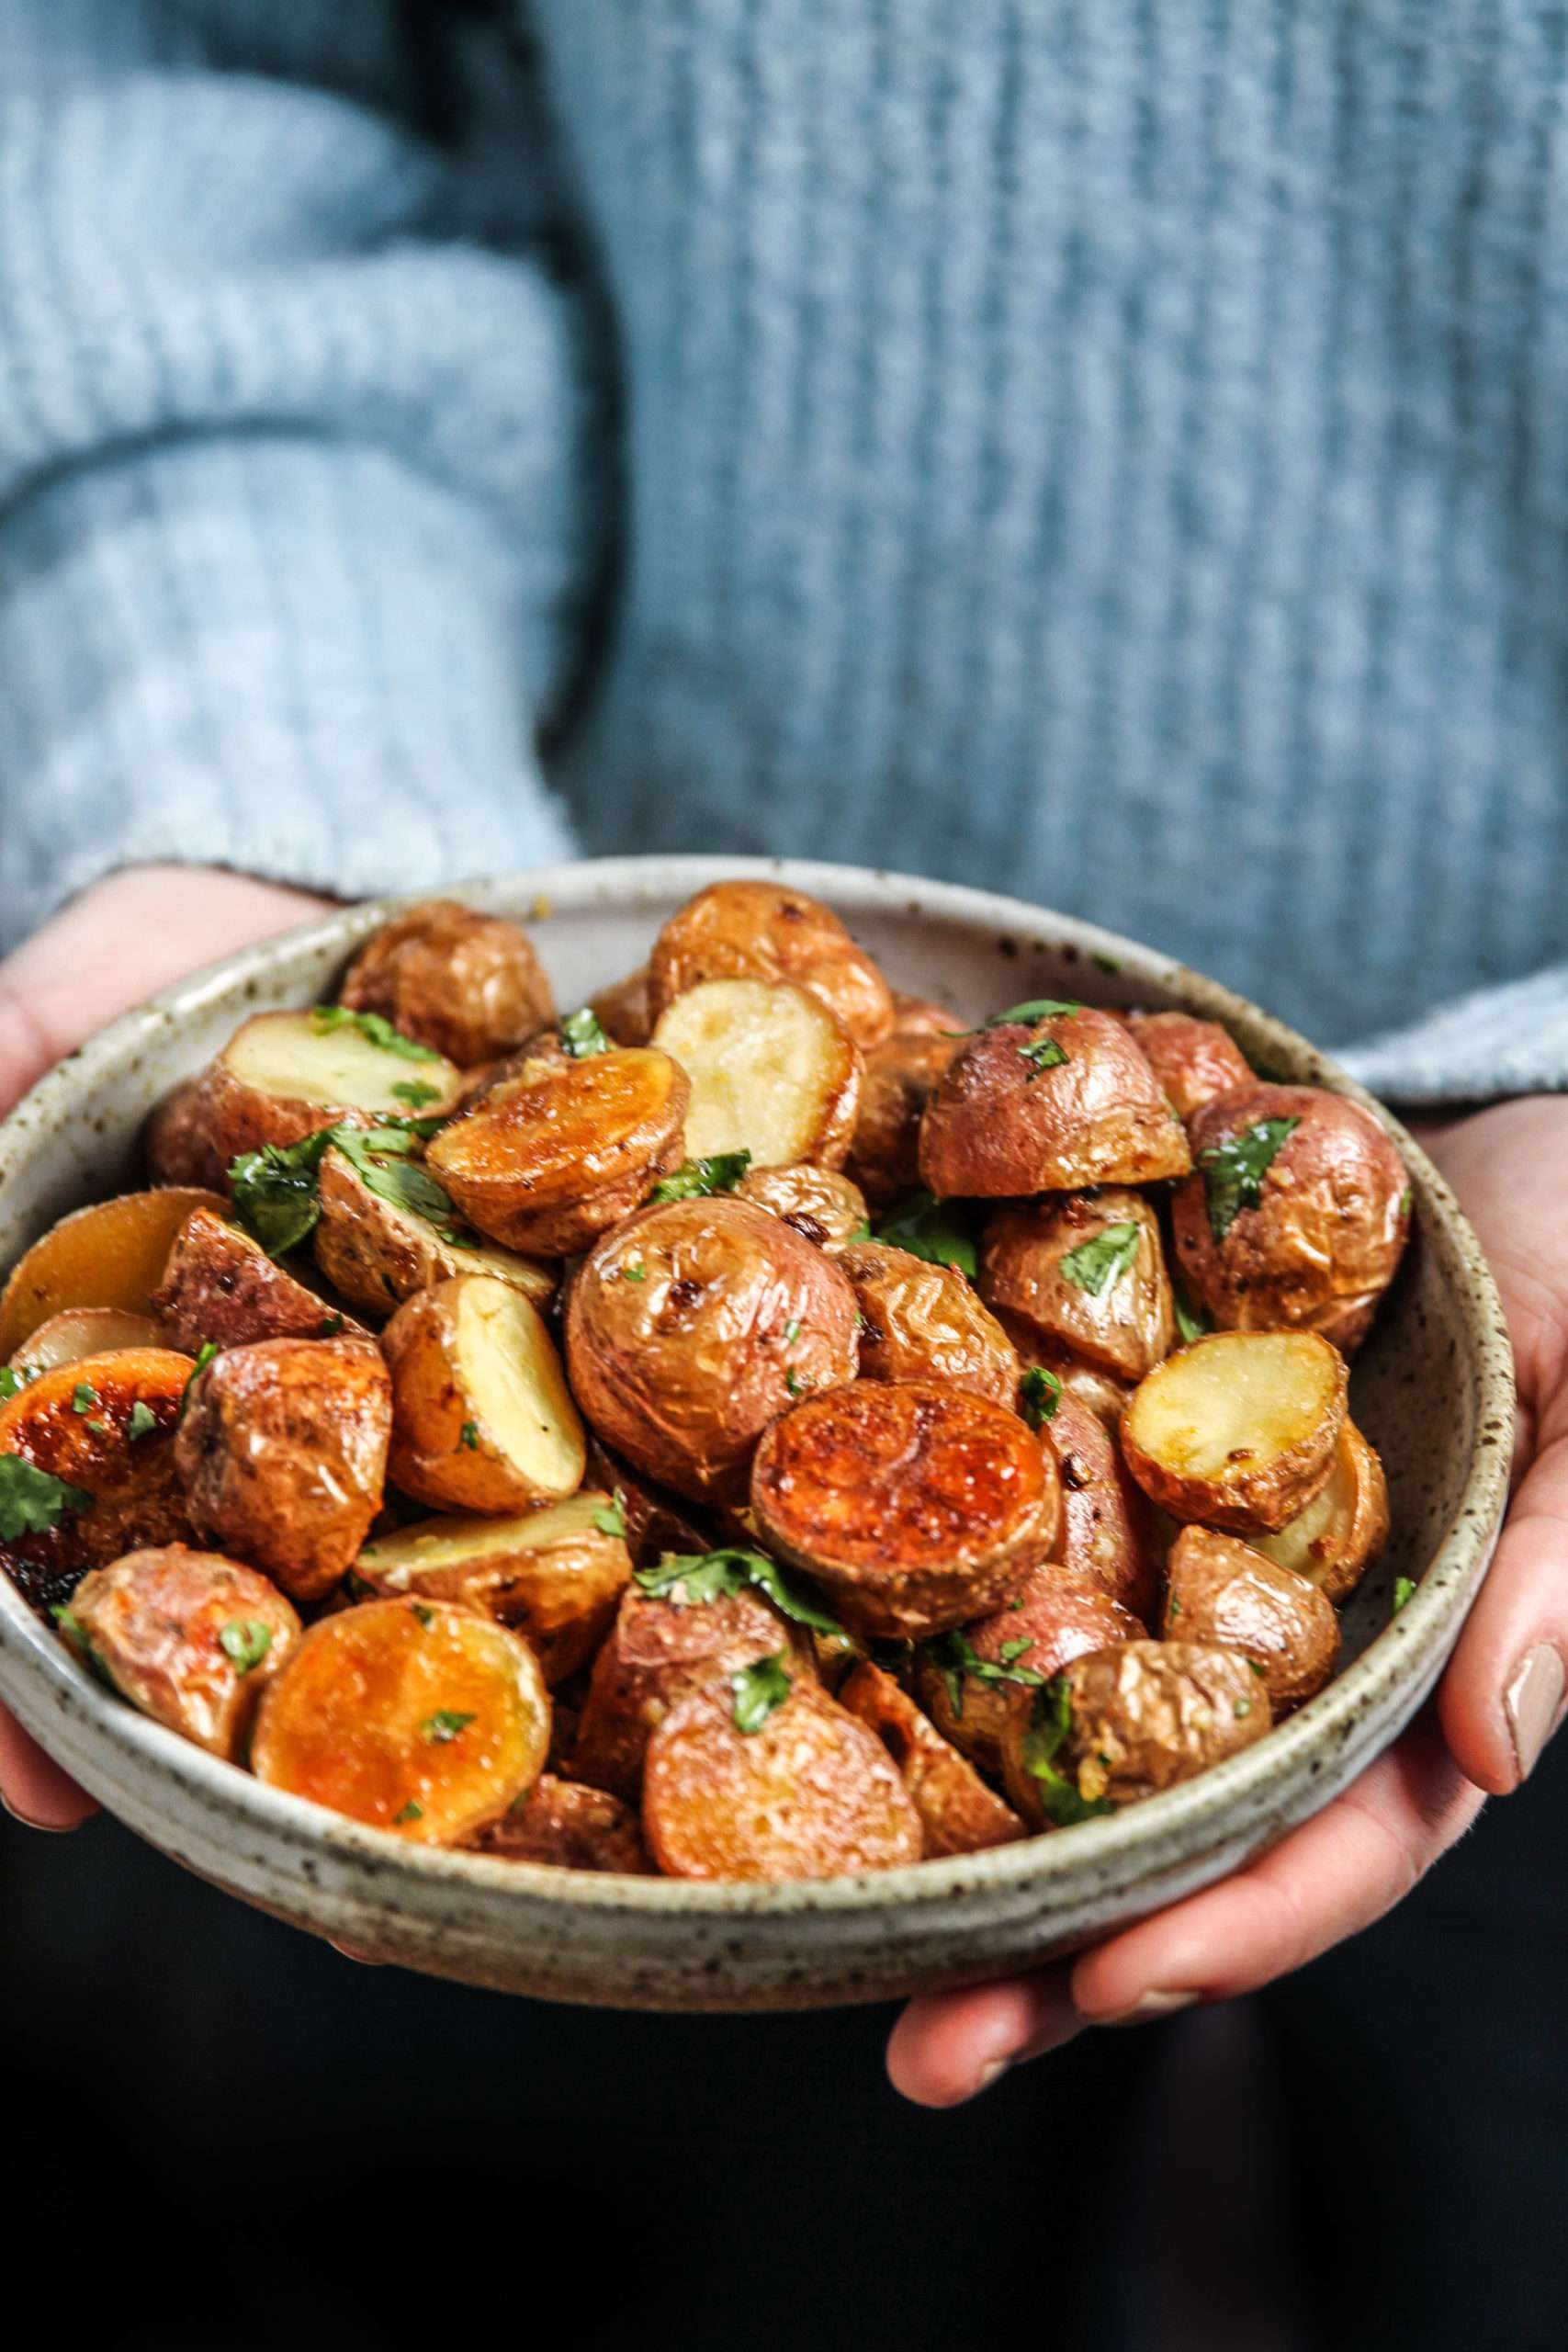 Roasted potatoes held in a serving bowl